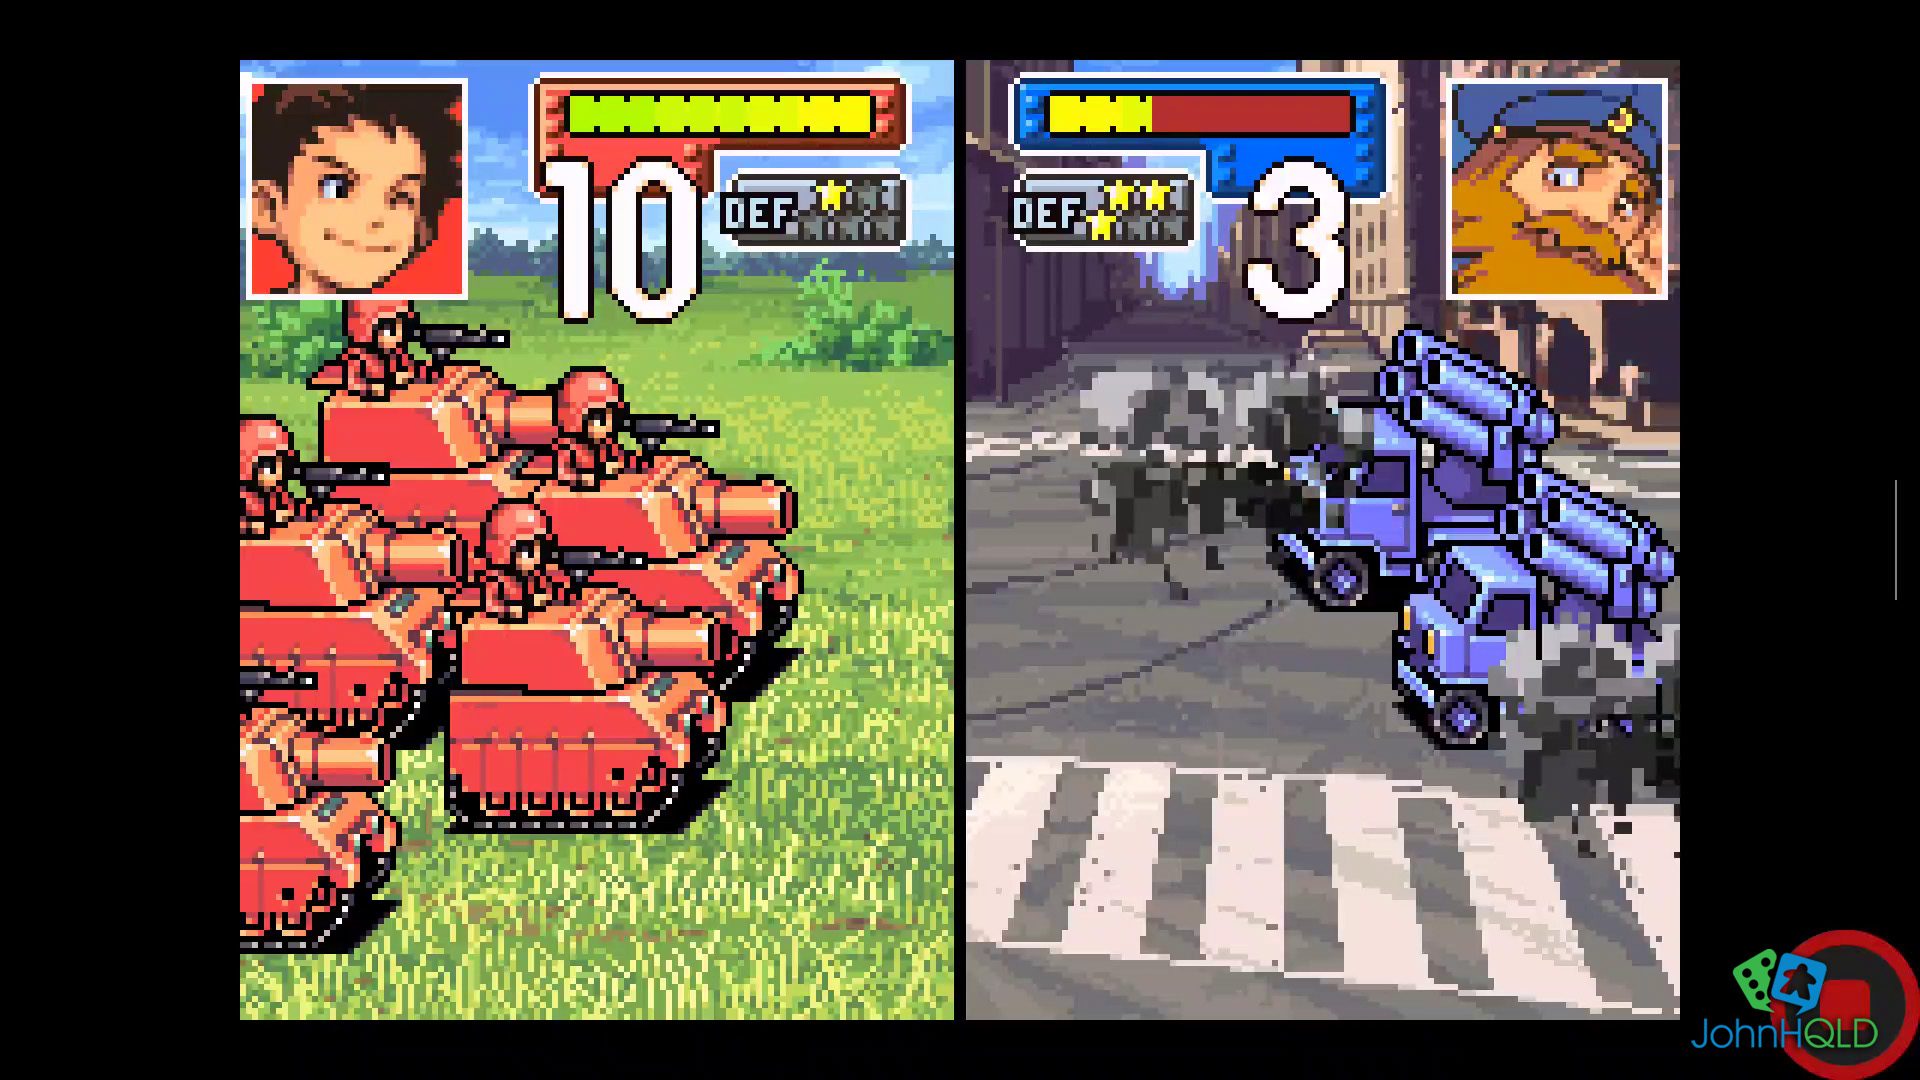 20220711 - Advance Wars - Still have a little setup to finalise but its been great playing with Zo sitting on me